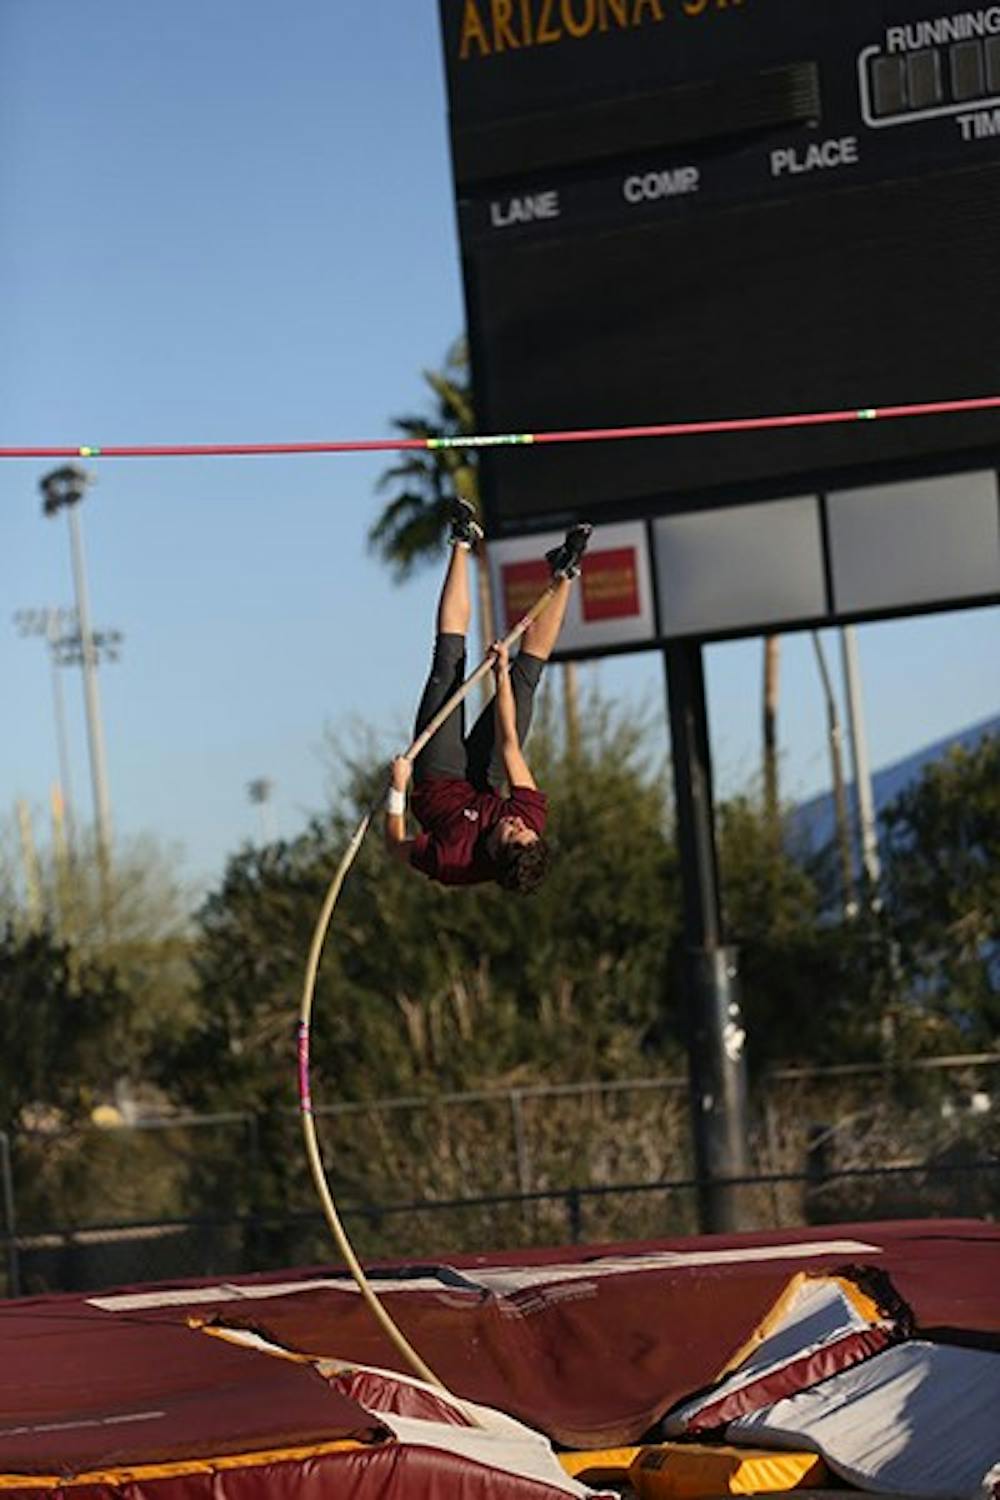 Chris Manuele practices Monday for ASU's upcoming meet. The first home meet will be held on March 21. (Photo by Arianna Grainey)